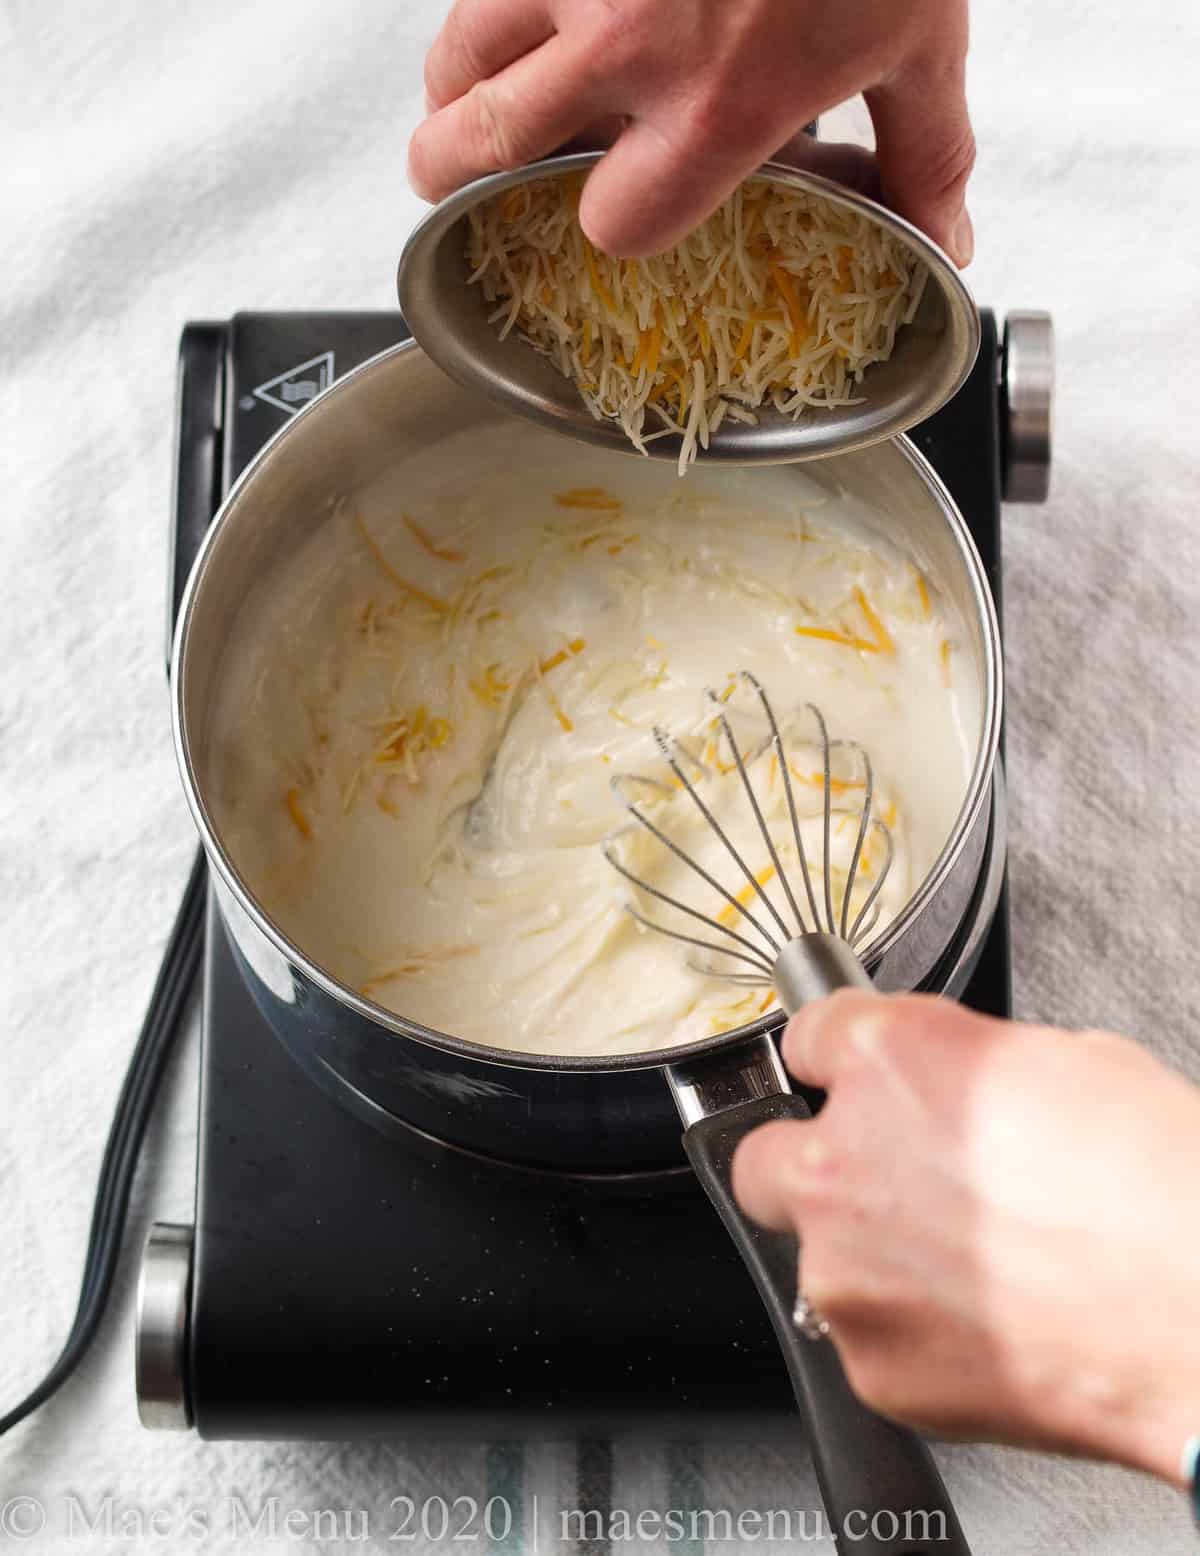 Whisking the cheese into the roux